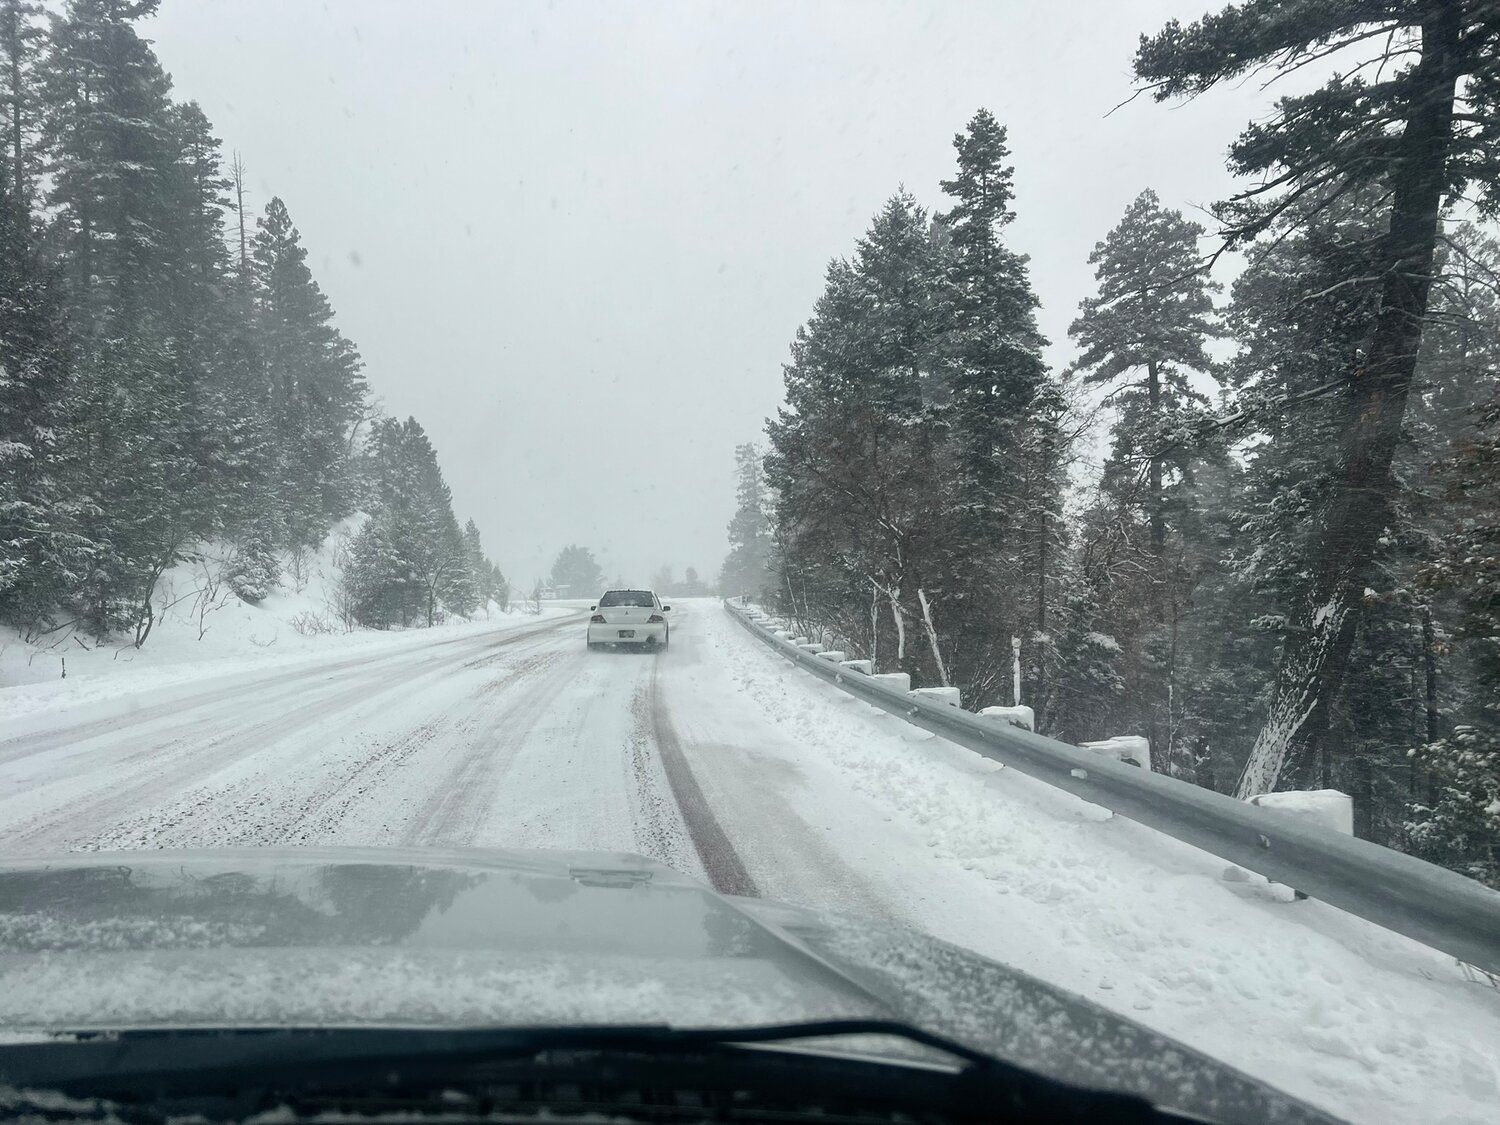 U.S. Highway 82 between Alamogordo and Cloudcroft is one of many that were snow packed and icy last week. More snow is predicted in the next several weeks for southern New Mexico.